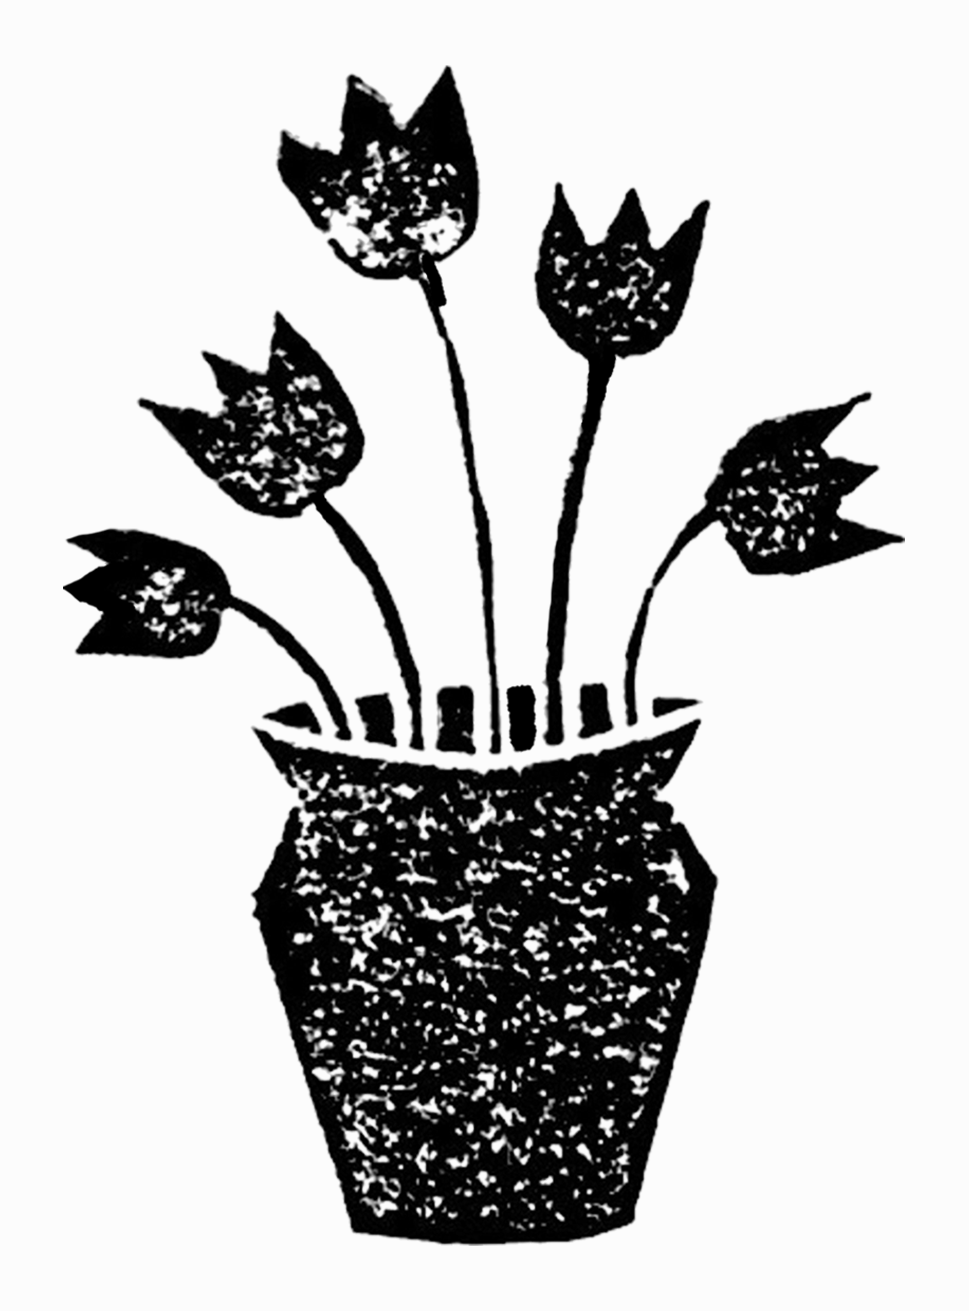 Very grainy black-and-white linocut print of a simply stylized pot of flowers, centered on a slightly off-white background.